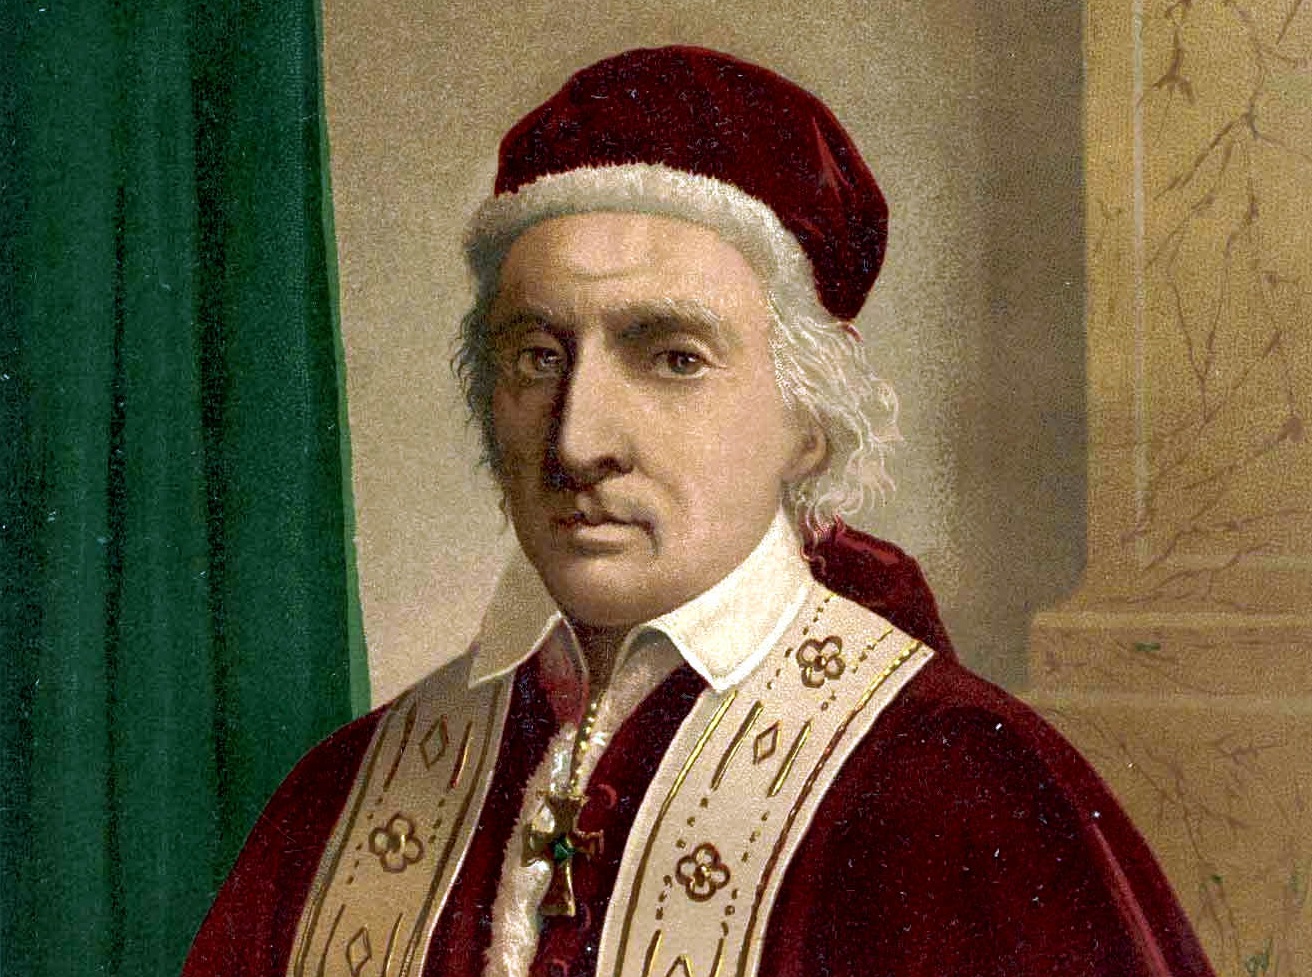 1740: Clement XII: A Pope who was Completely Blind, but Nonetheless Active